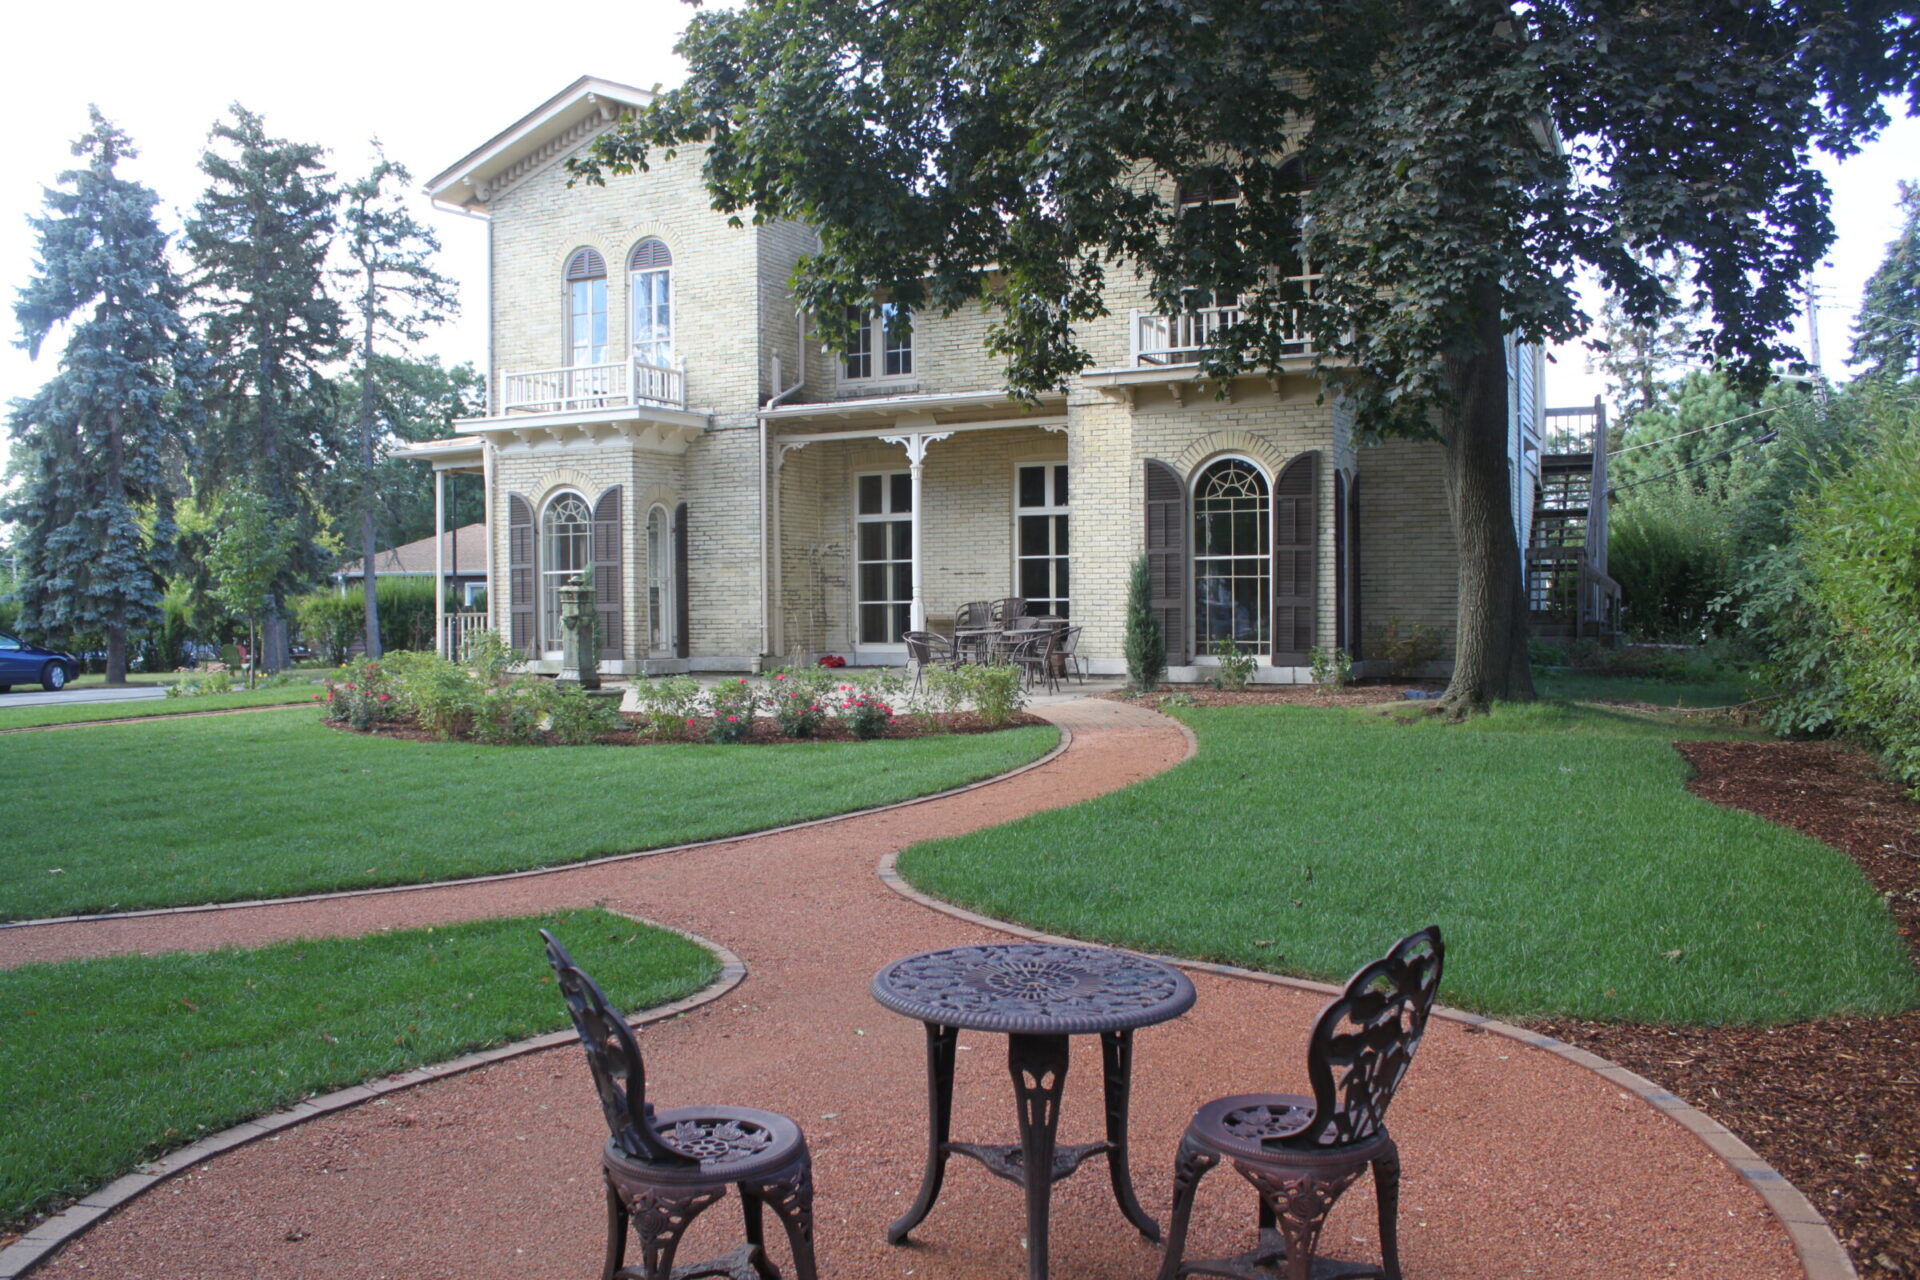 A two-story brick house with white trim, ornate balconies, and arched windows surrounded by a manicured garden, brick pathways, and a wrought-iron table set.